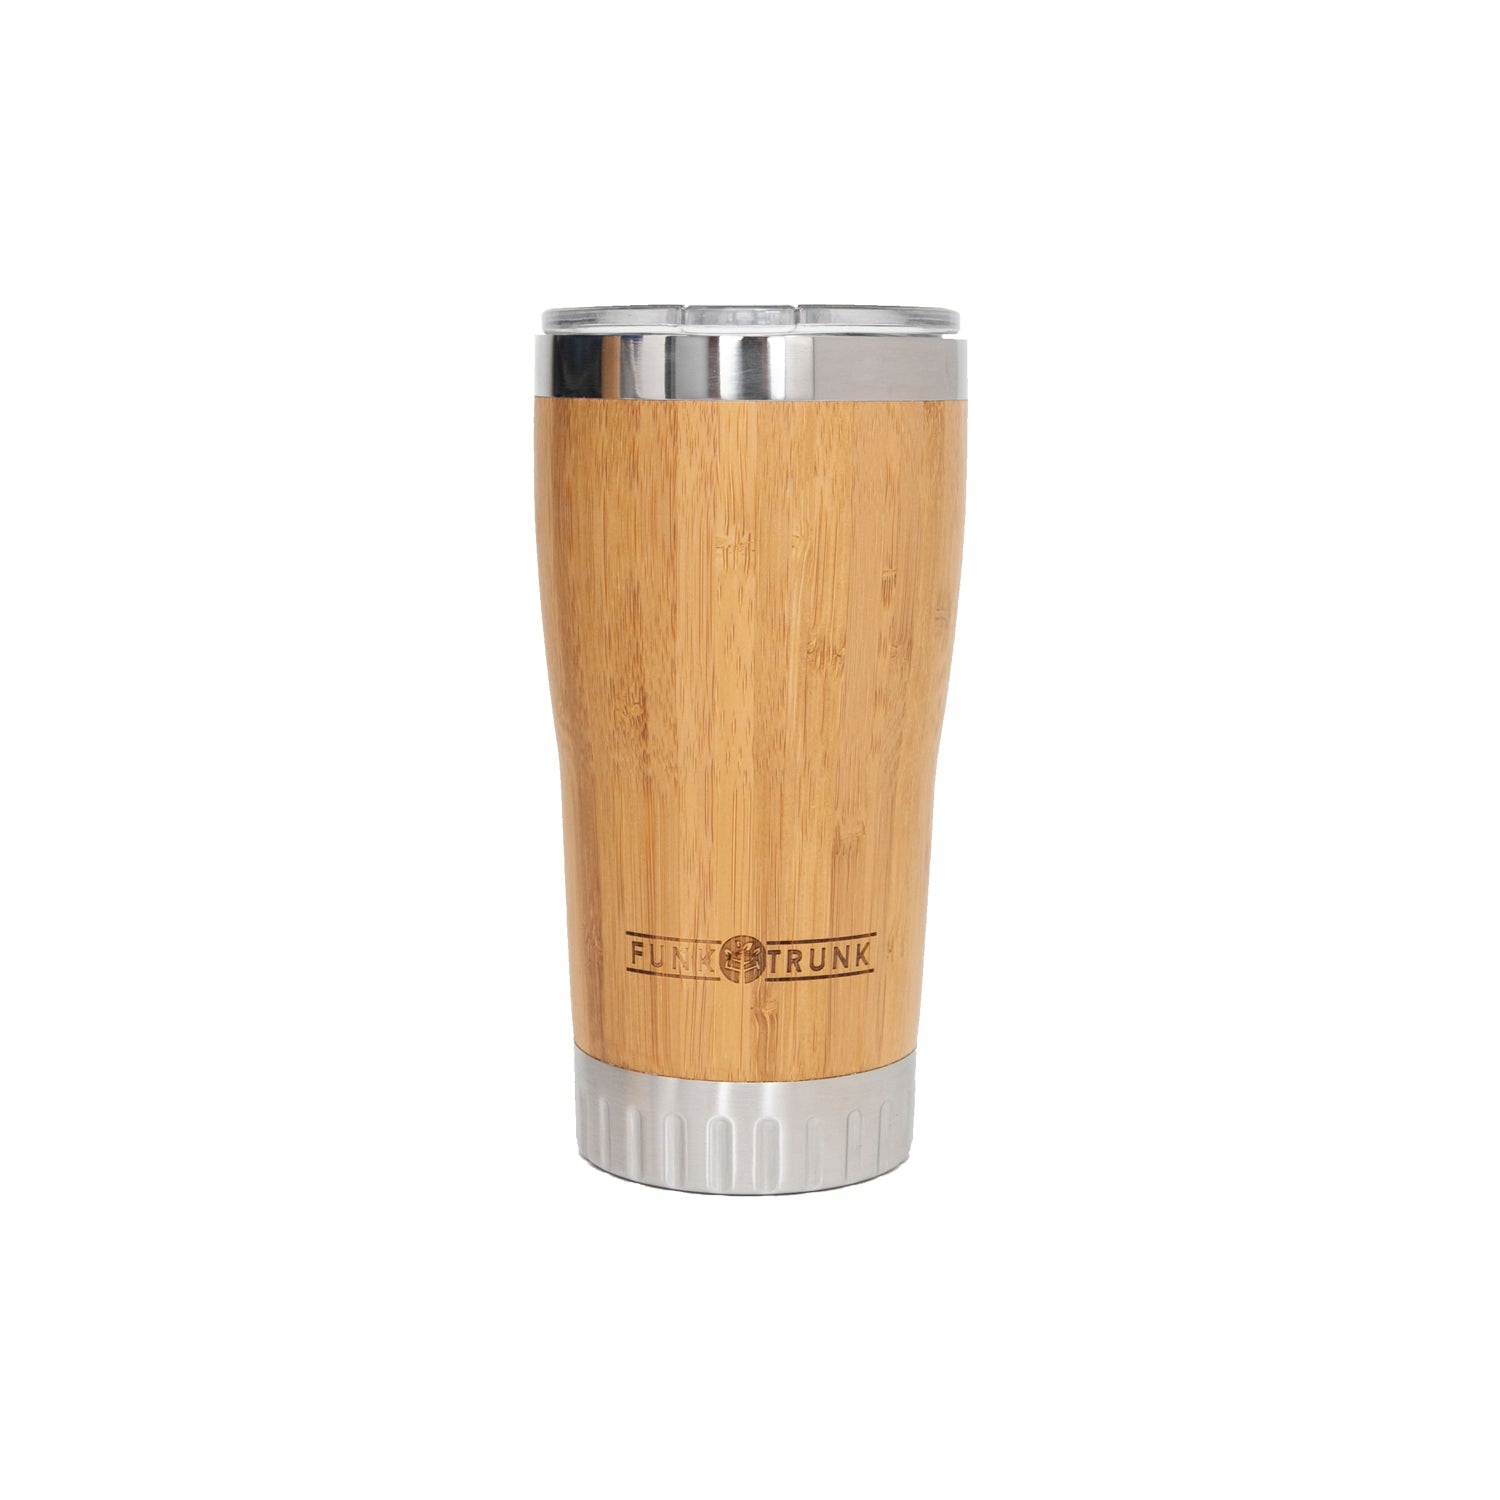 Funk Trunk bamboo cup with lid